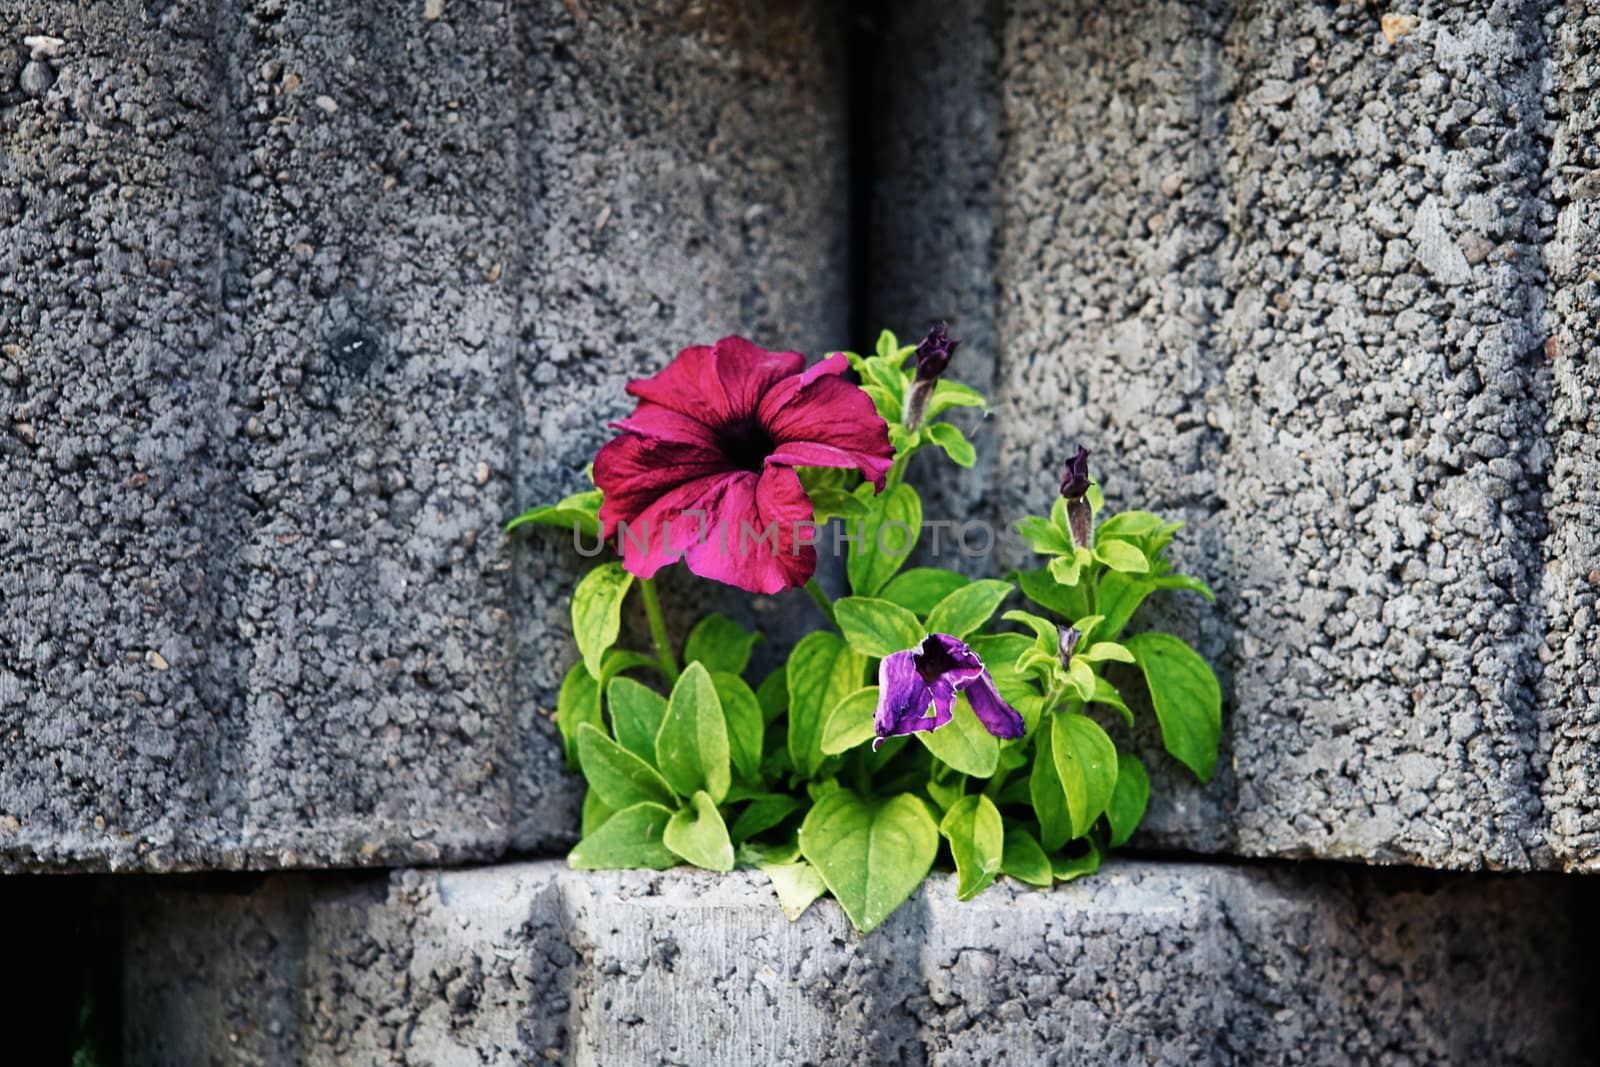 wall made of stone flowerbed with nasturtium